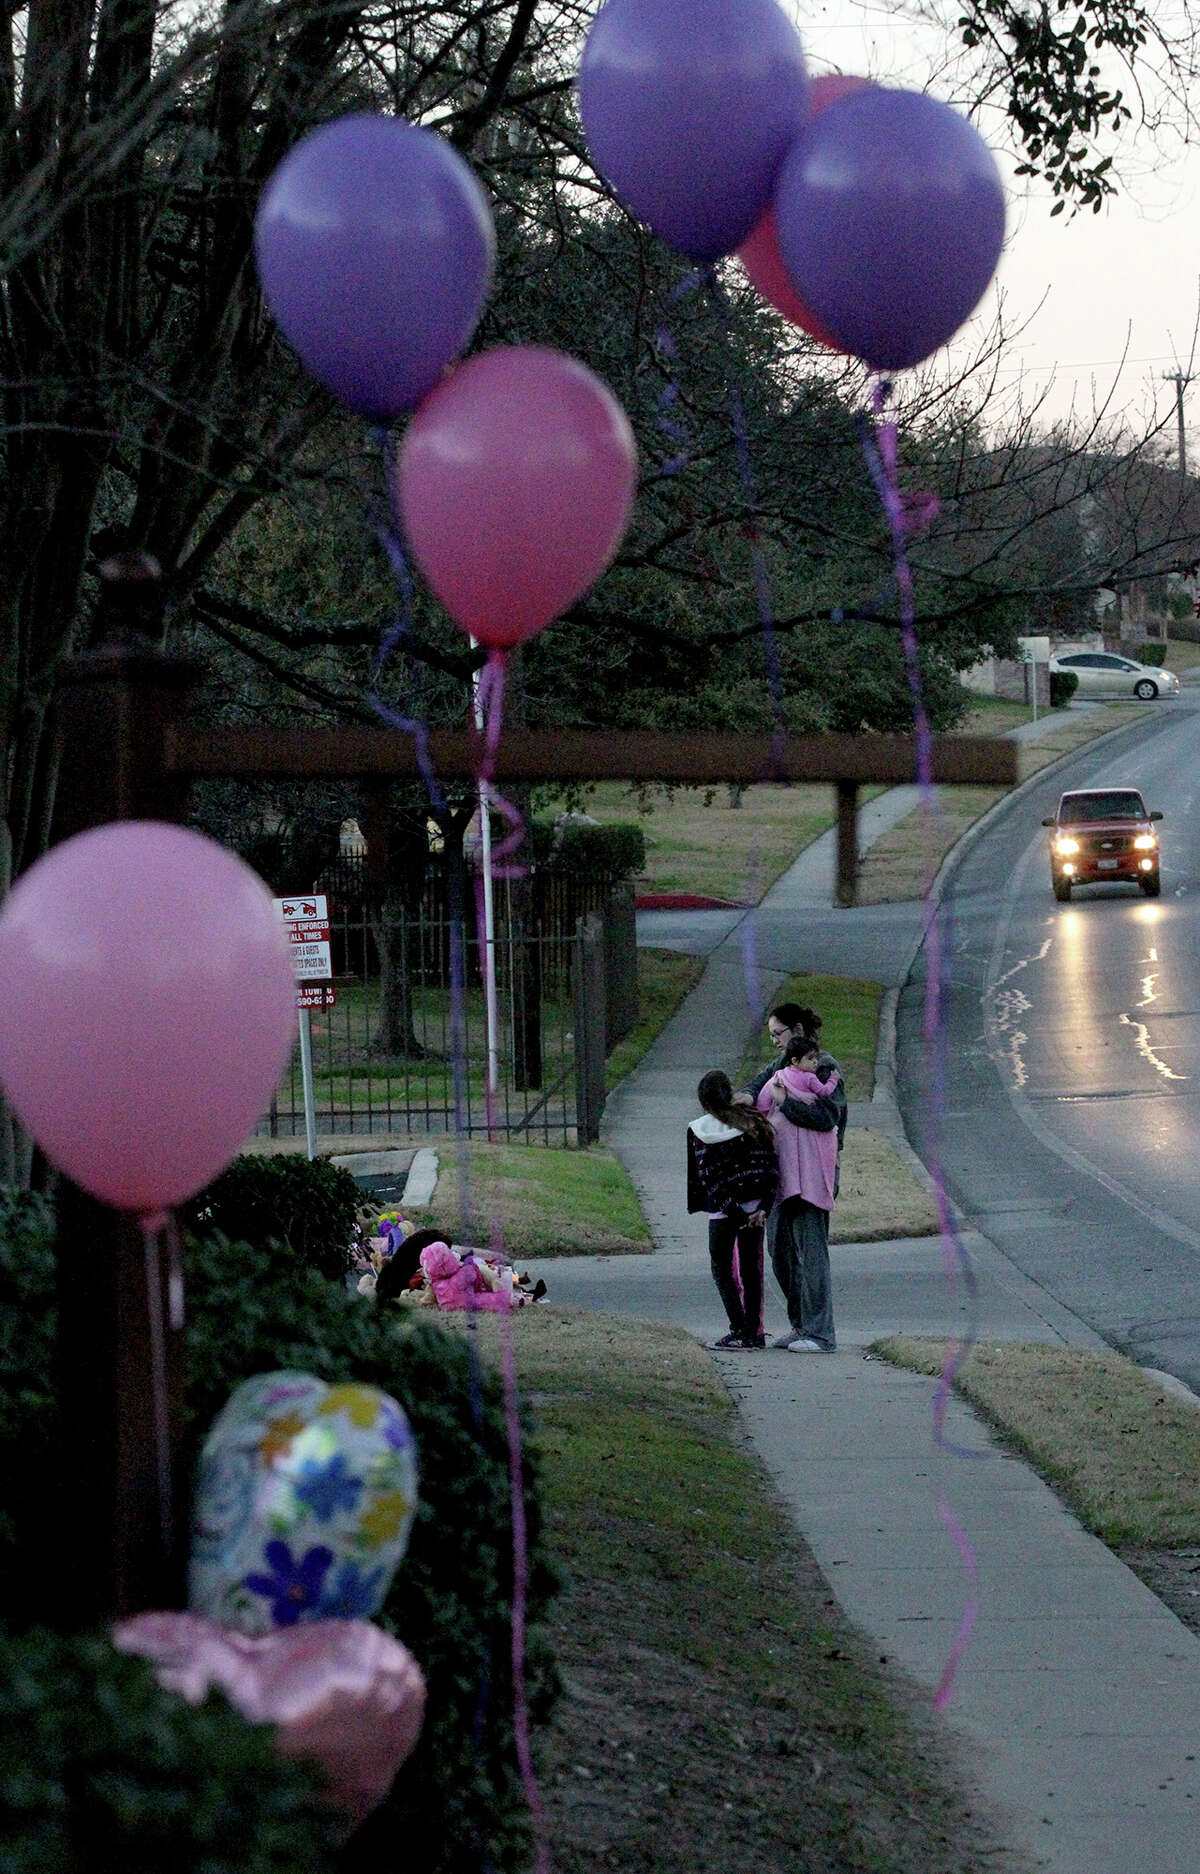 Monica Bloompott visits an area with her children Thursday January 16, 2014 where Tatyana Babineaux, 9, was killed yesterday on the 11,700 block of Braesview after being hit by a truck. Babineaux was walking to Larkspur Elementary about 7:00 am. when she was struck by the hit-and-run driver.